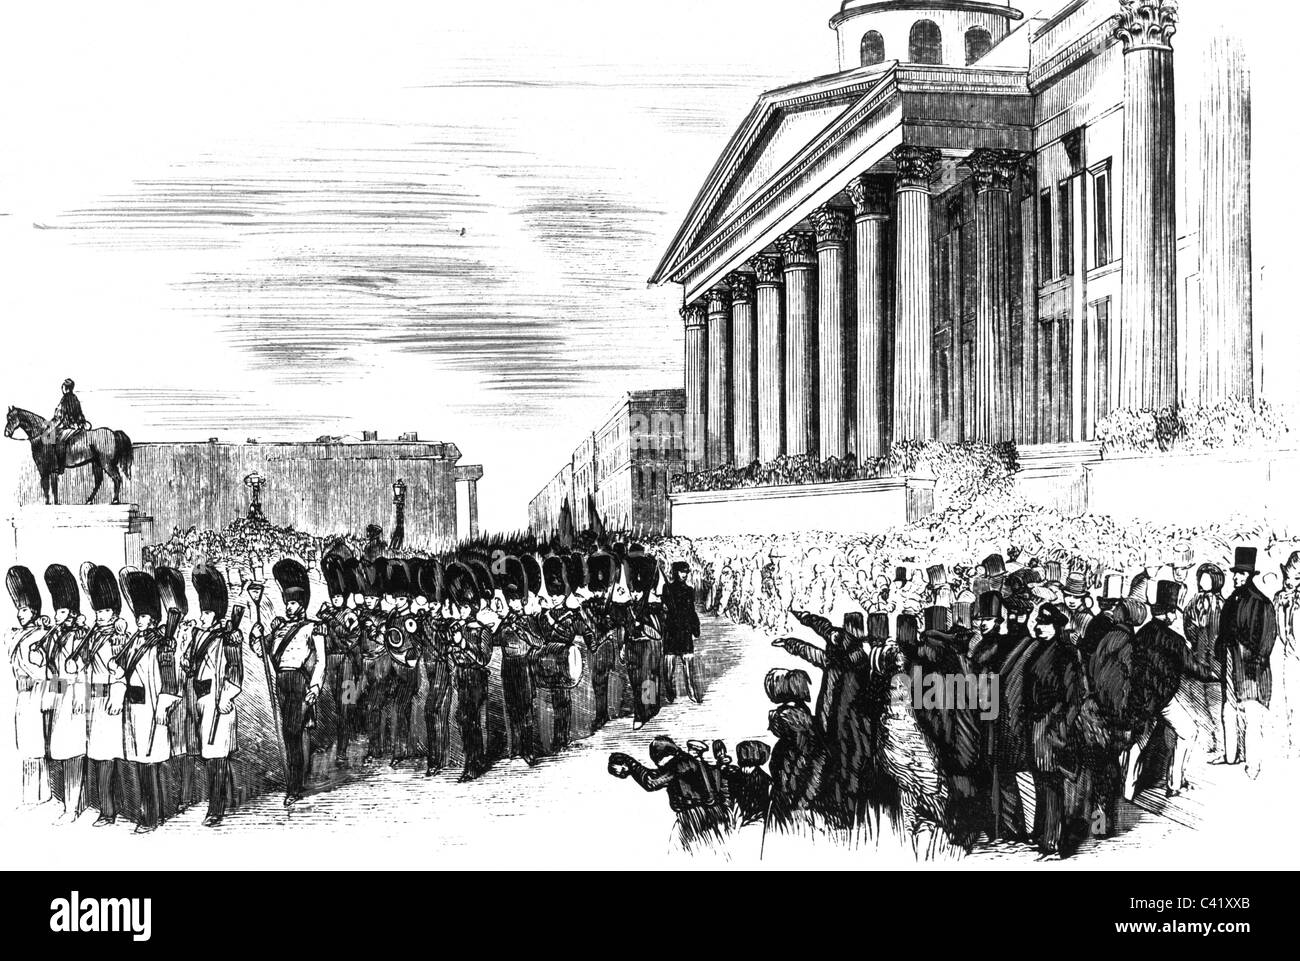 events, Crimean War 1853 - 1856, Brtitish Guard marching through London enroute to their embarcation, 14.2.1854, wood engraving, military, soldiers, expedition forces, infantry, band, musicians, music, 19th century, historic, historical, people, Additional-Rights-Clearences-Not Available Stock Photo